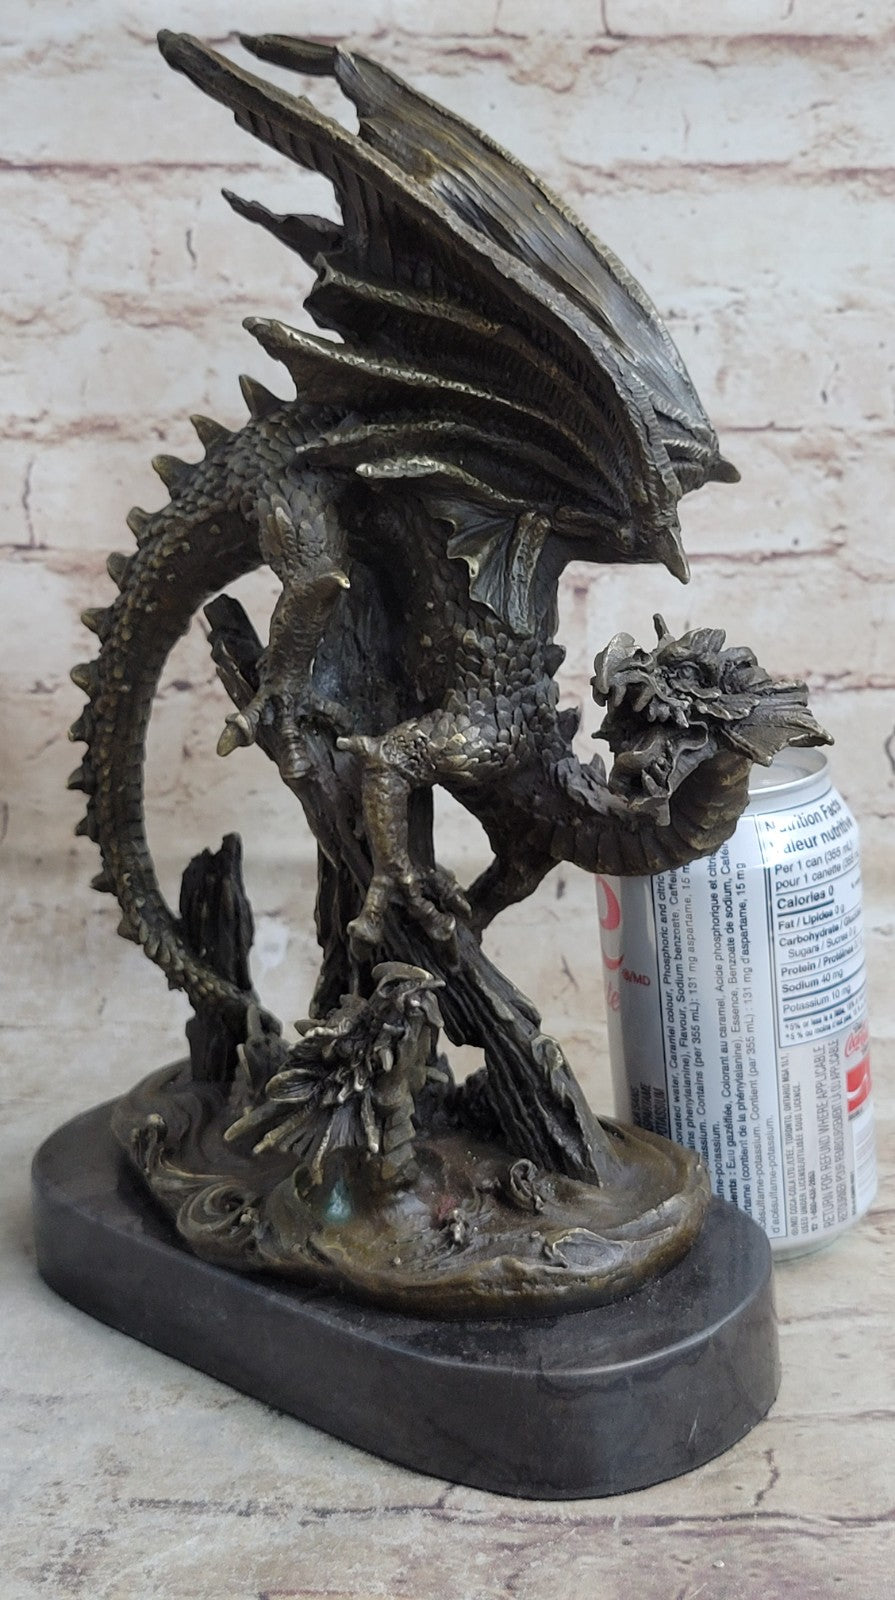 Handcrafted bronze sculpture SALE Art Asian Chinese Dragon Home Decoration Decor